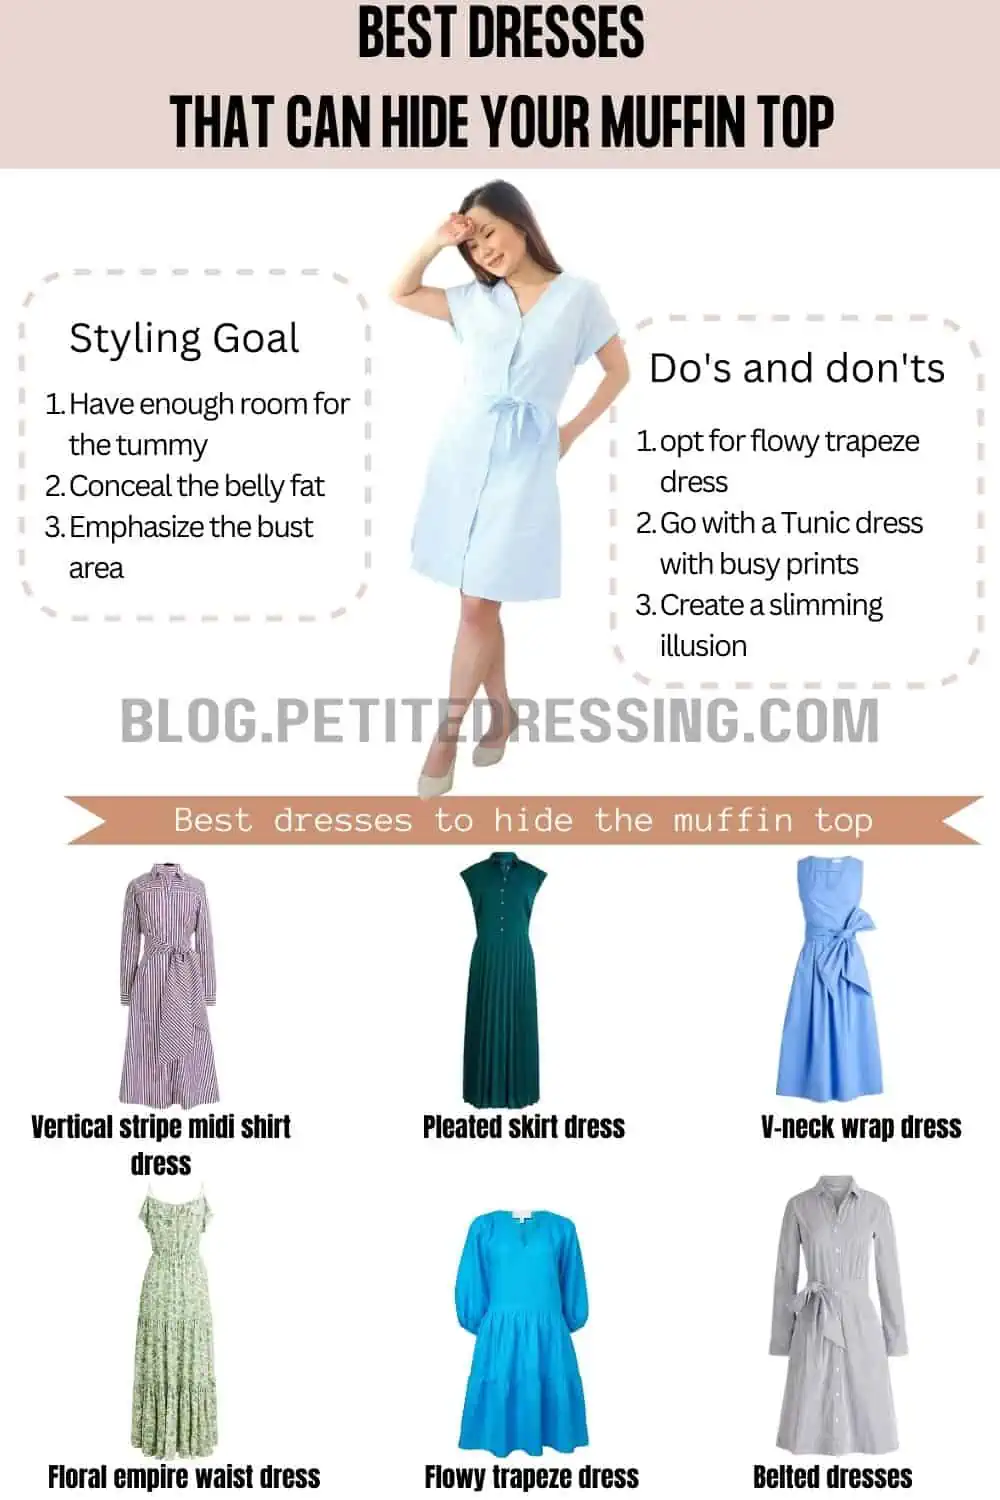 9 Types of Dresses that can Hide a Muffin Top - Petite Dressing